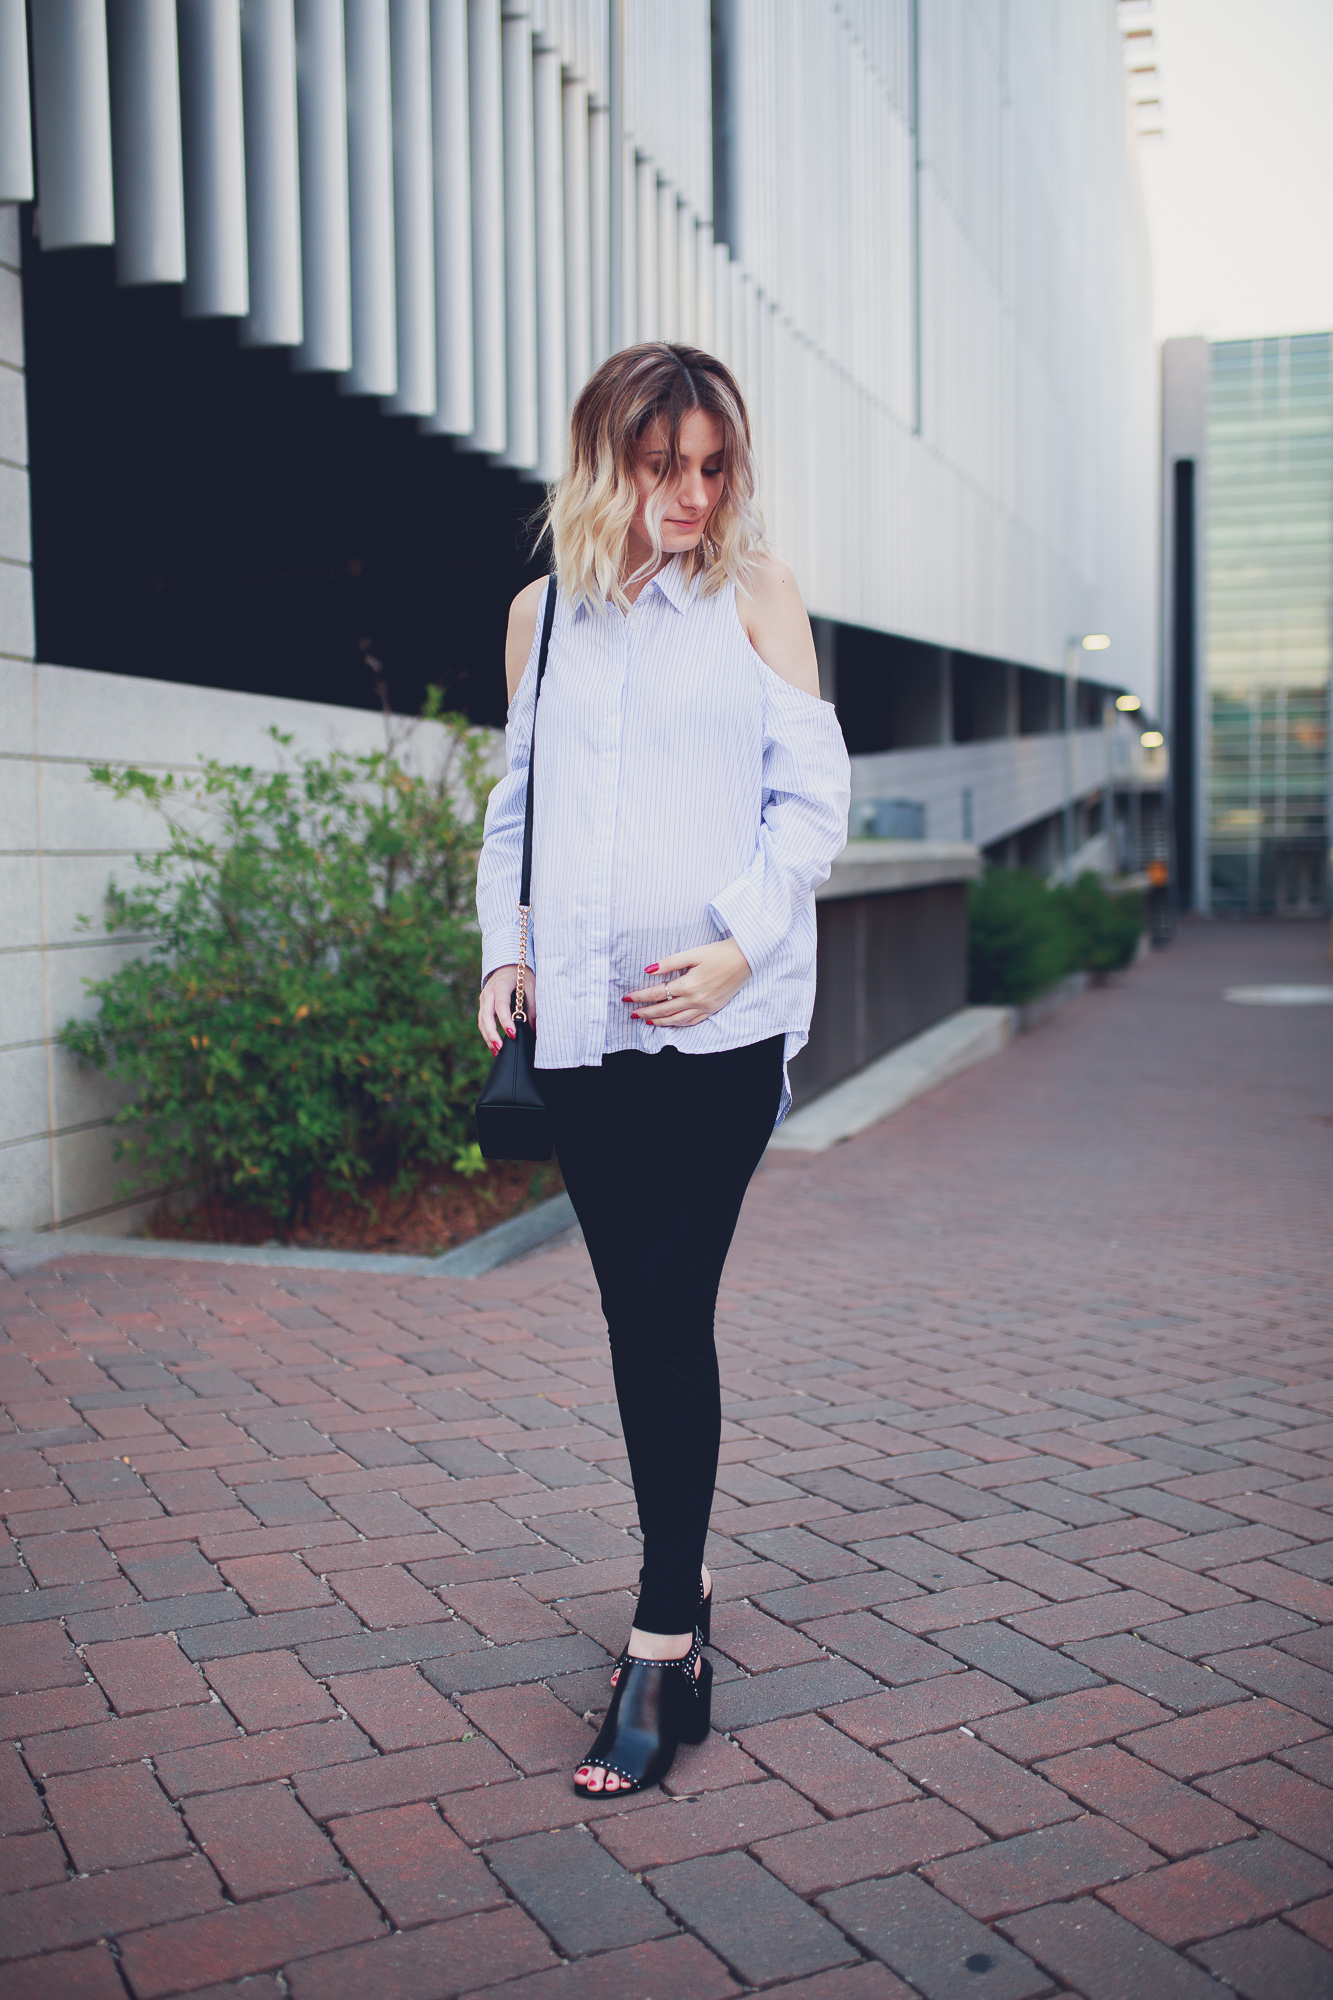 Fashion Blogger and lifestyle blogger Jessica Linn from Linn Style wearing a cold shoulder pinstripe button up blouse from Forever21, black leggings from Romwe, and black silver studded heels from Charming Charlie's also carrying a black and gold Michael Kors Purse. Photos taken in Downtown Raleigh North Carolina.